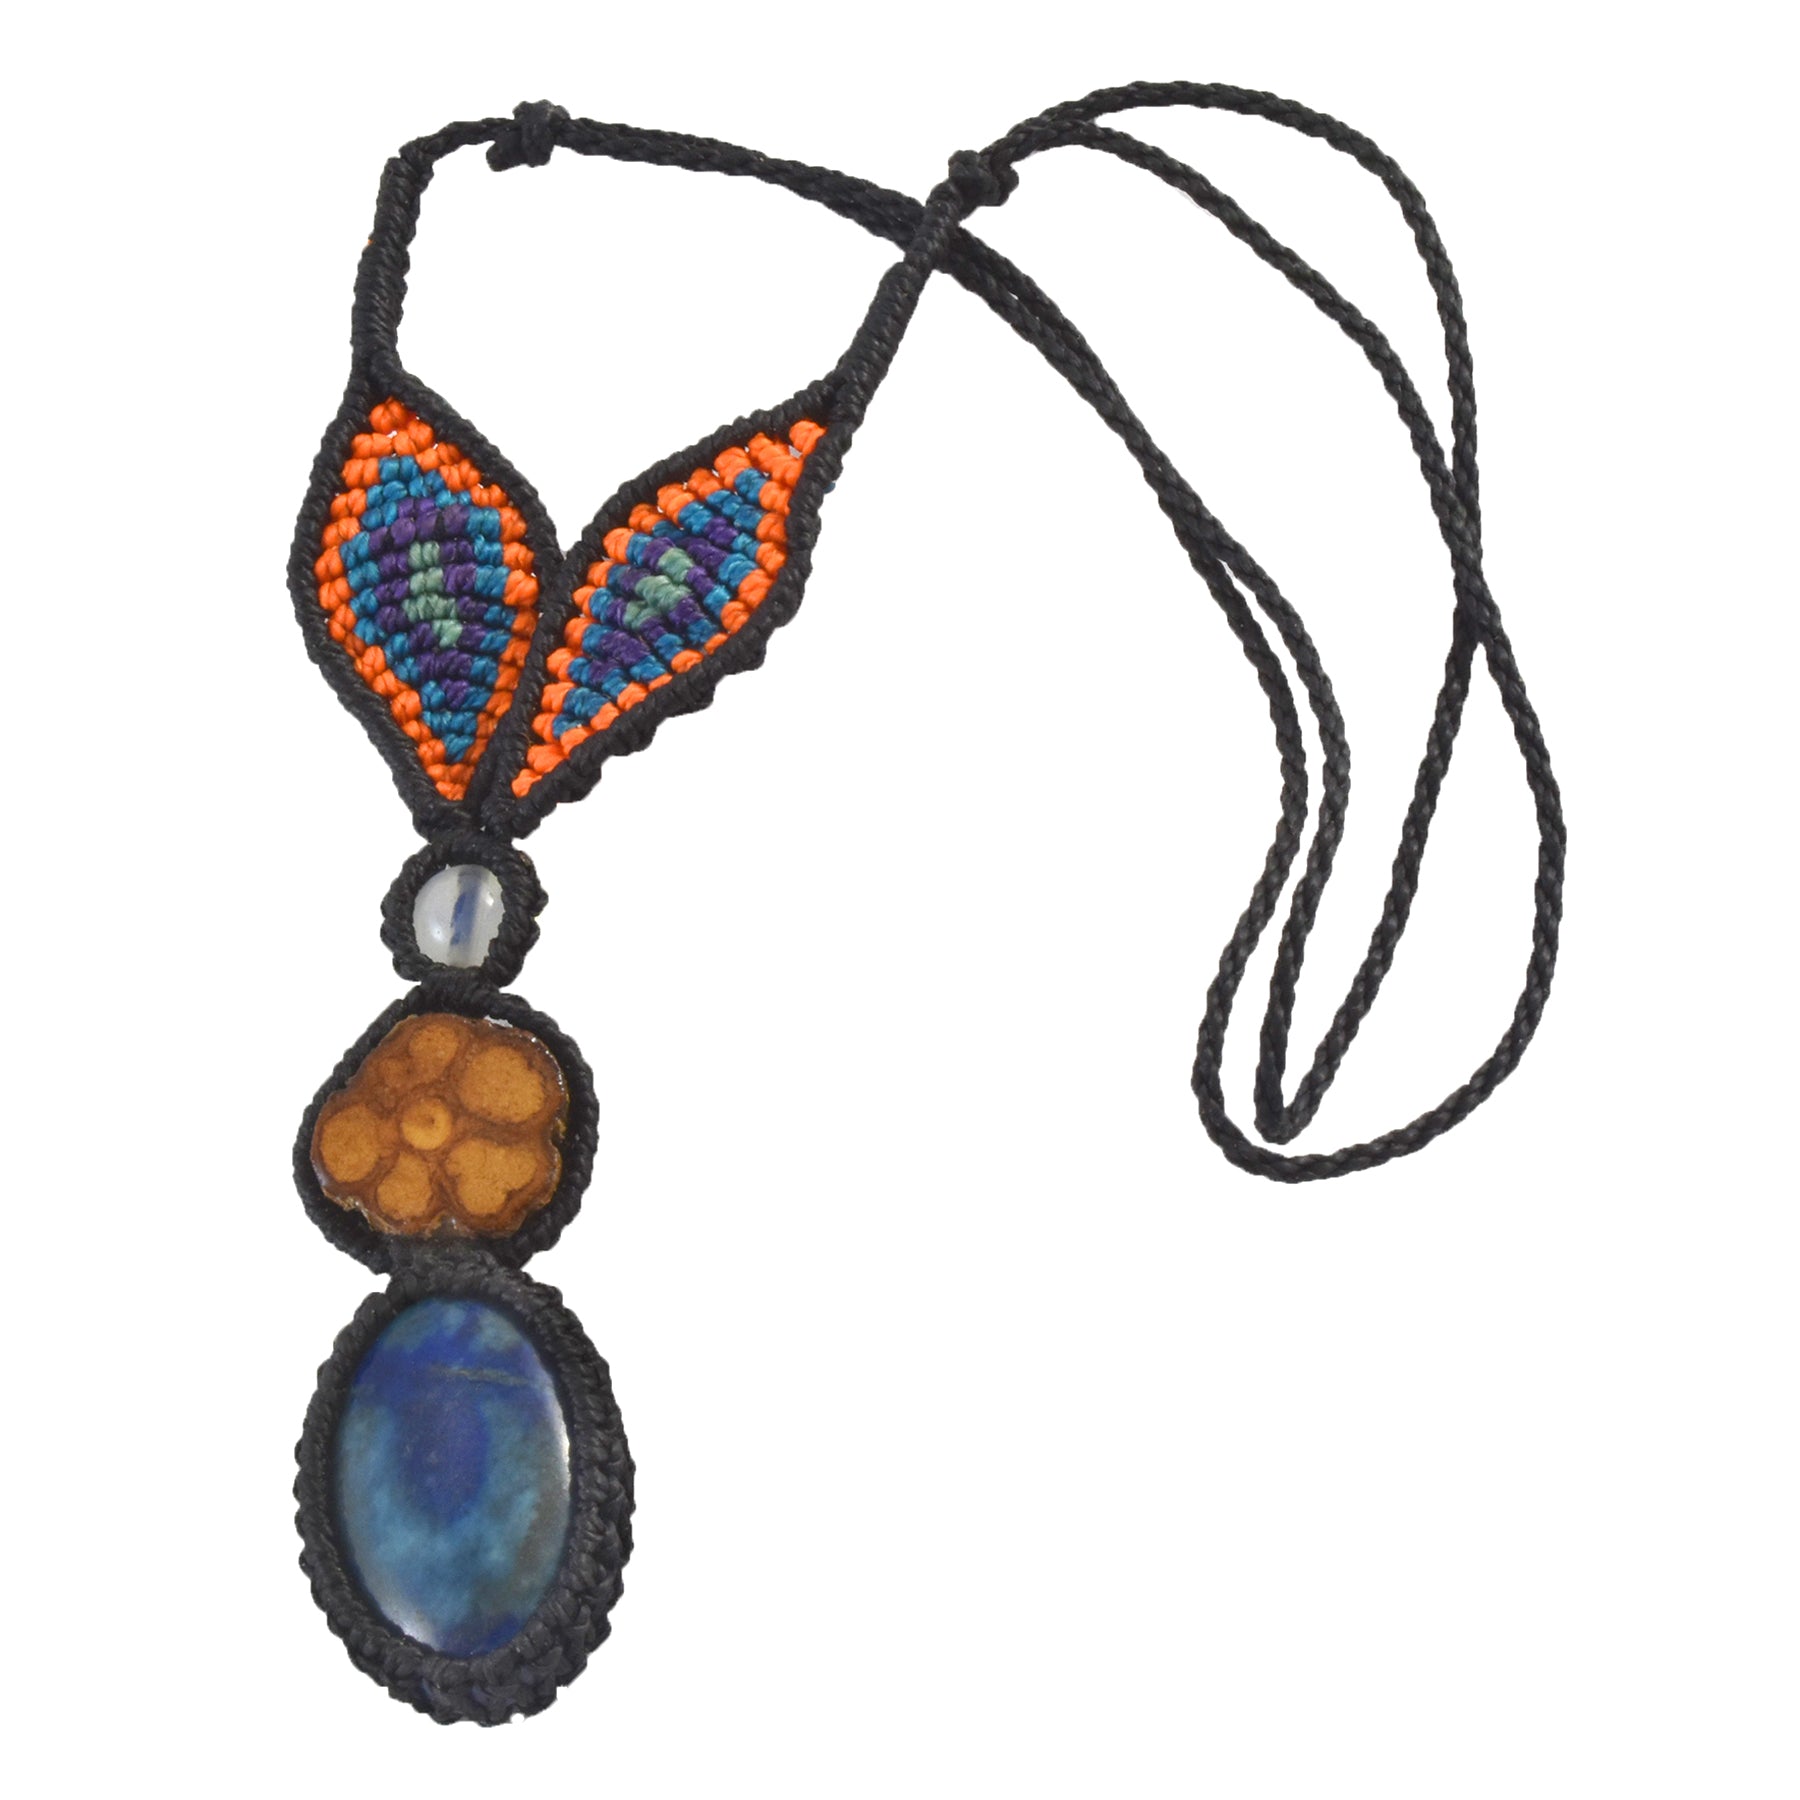 Ayahuasca vine and lapis lazuli macrame necklace with woven leaves